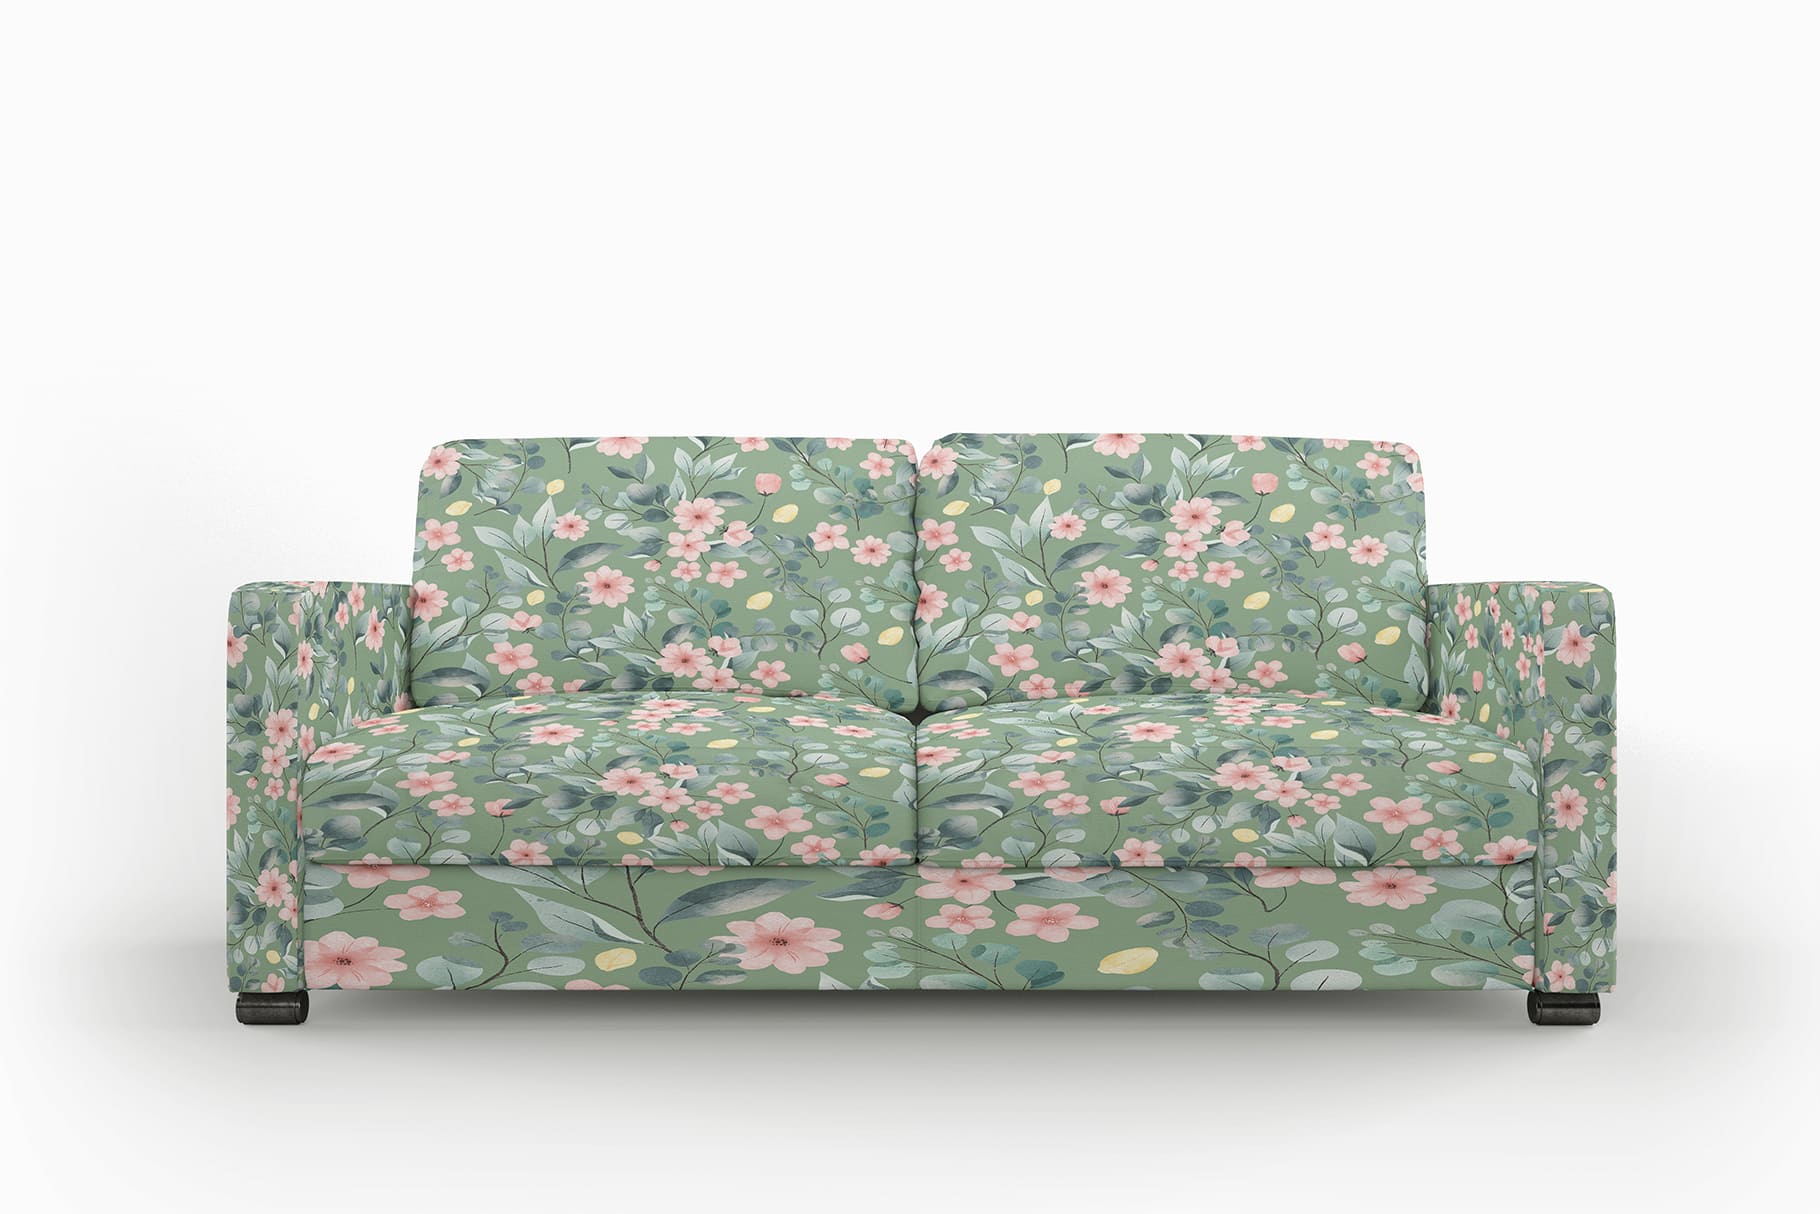 Classic sofa in floral green.
